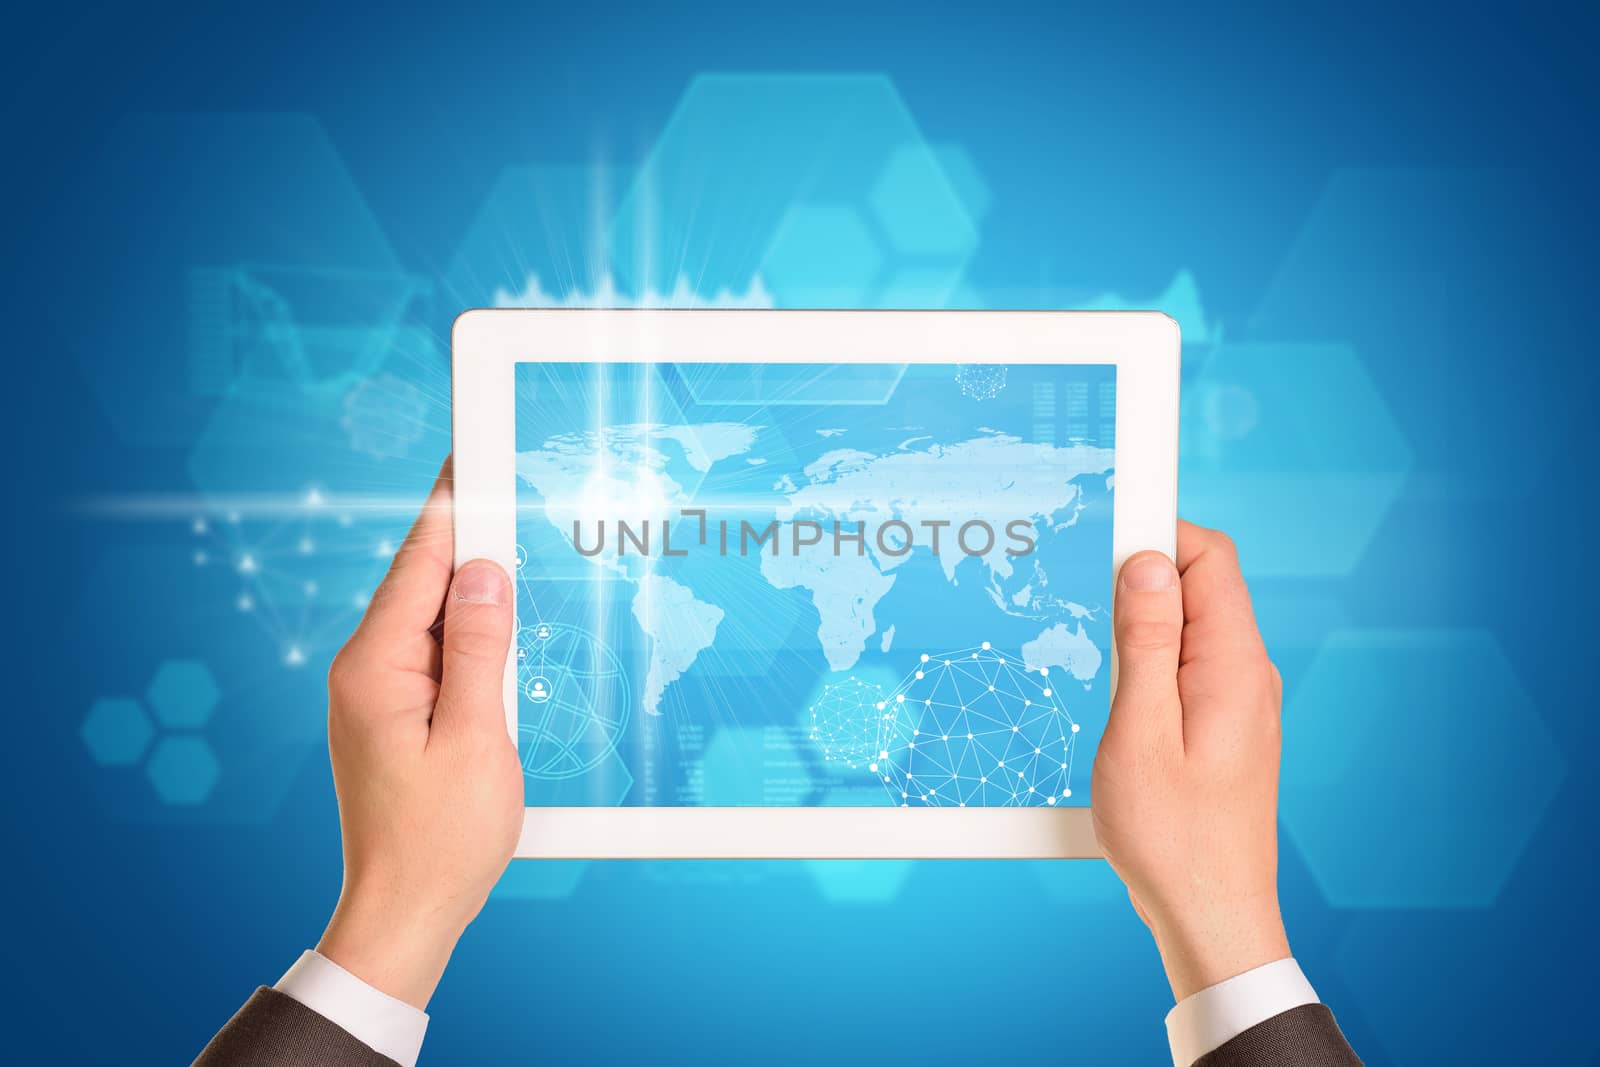 Man hands using tablet pc. Image of business elements on tablet screen